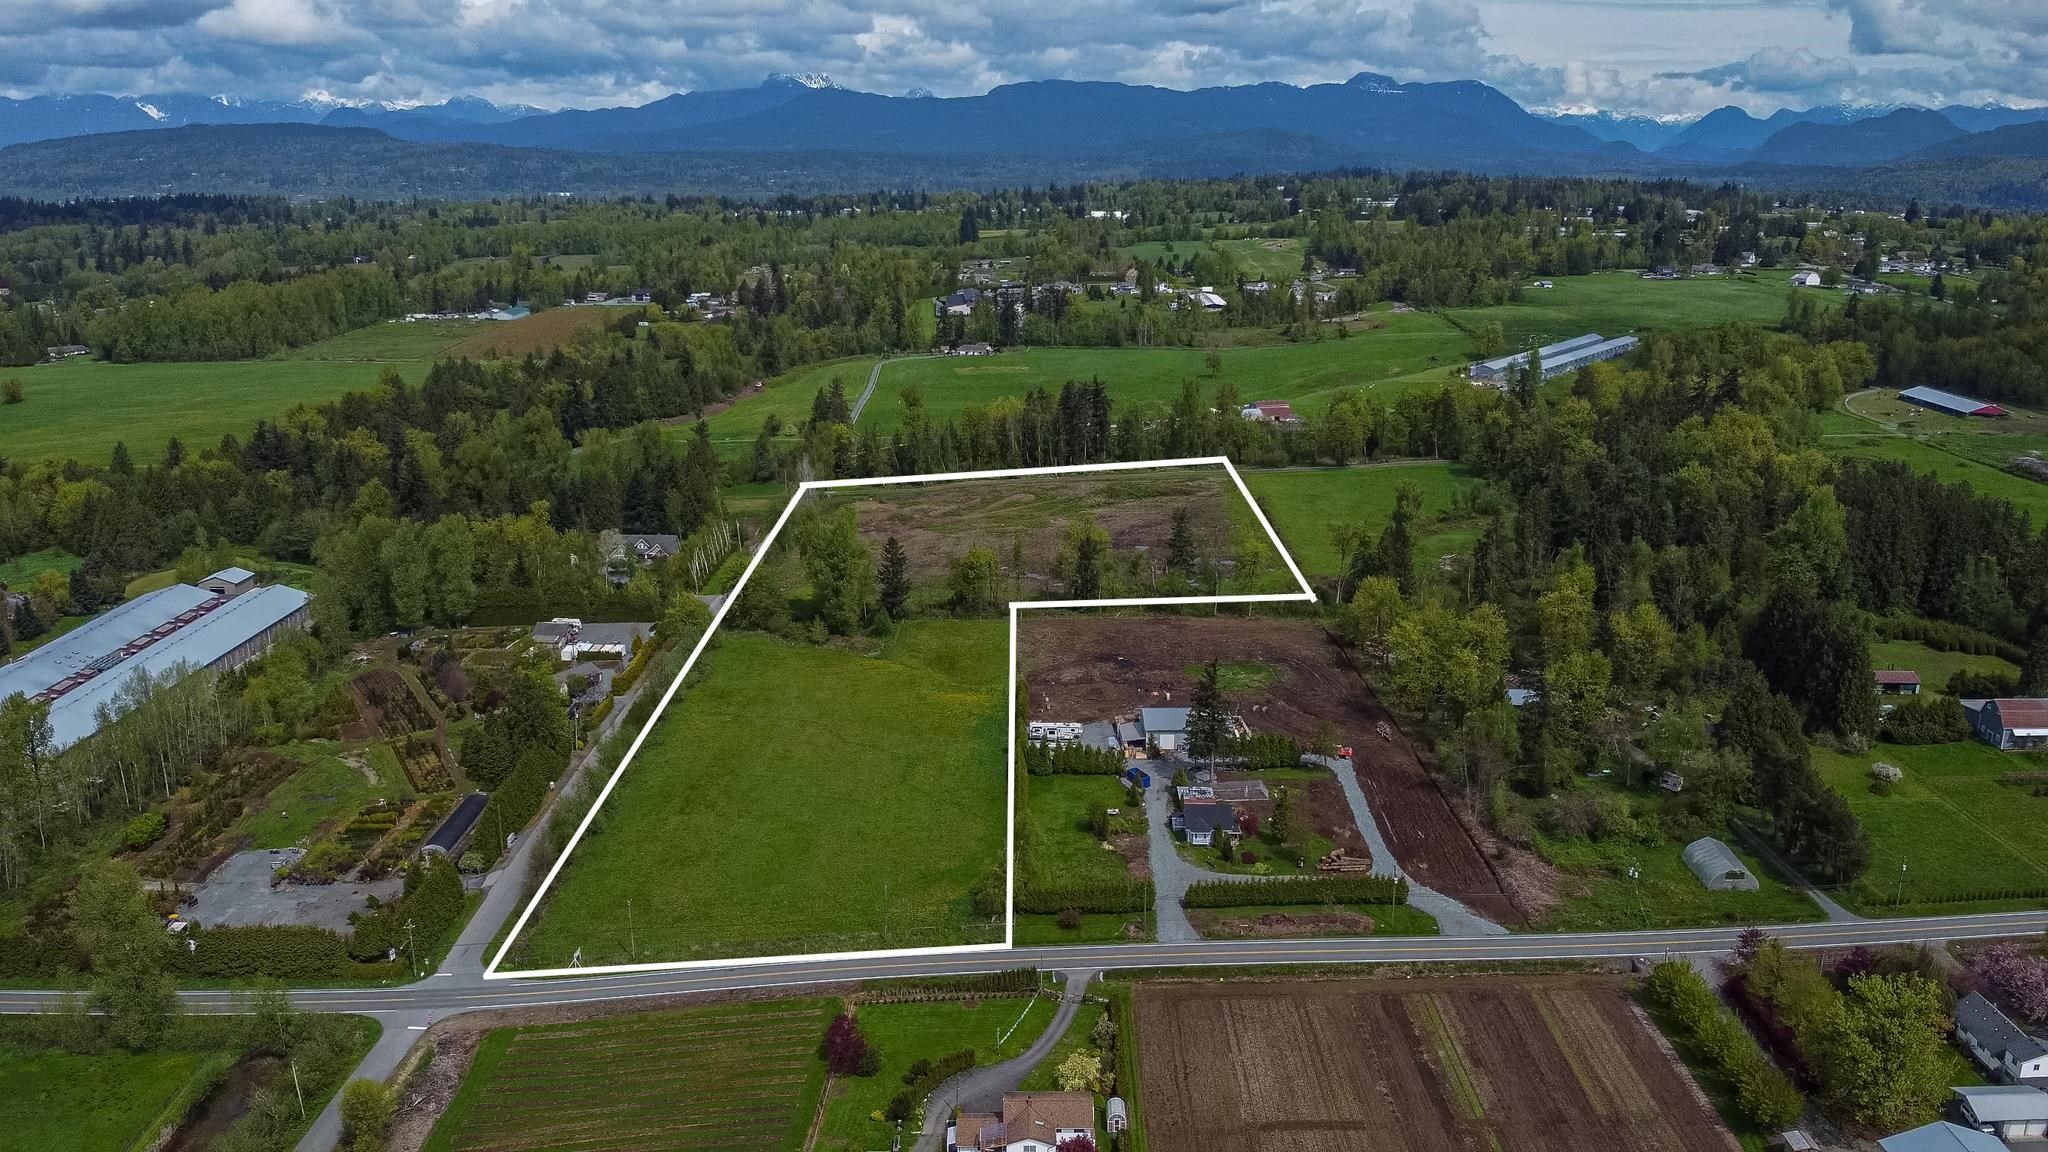 Main Photo: 28441 58 Avenue in Abbotsford: Bradner Agri-Business for sale : MLS®# C8049721